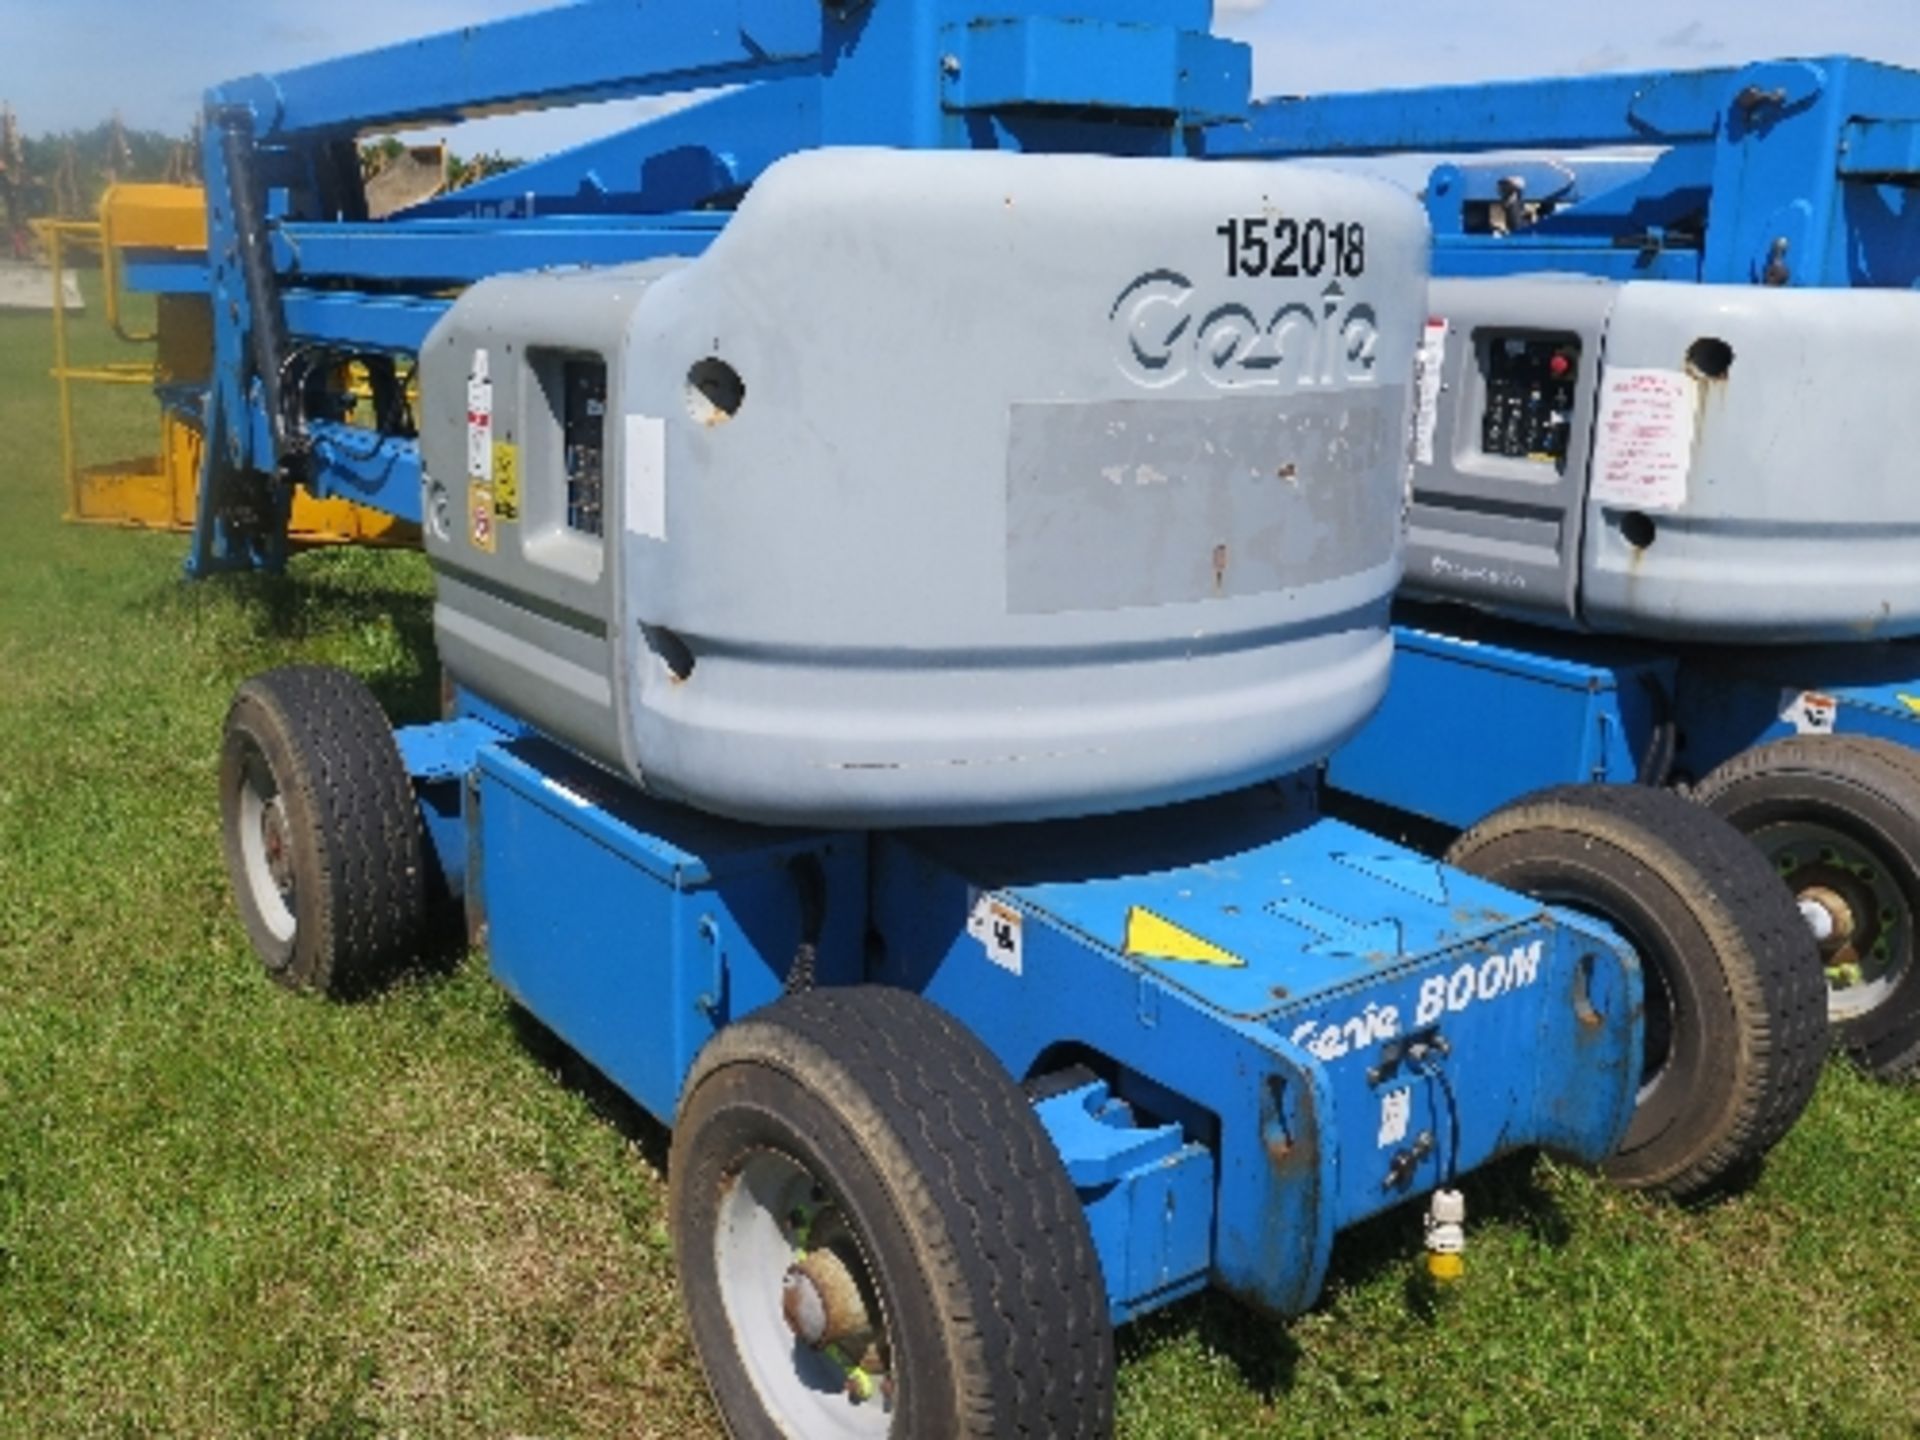 Genie Z45/25 Bi-fuel artic boom boom 811 hrs 2006 152018ALL LOTS are SOLD AS SEEN WITHOUT WARRANTY - Image 2 of 6